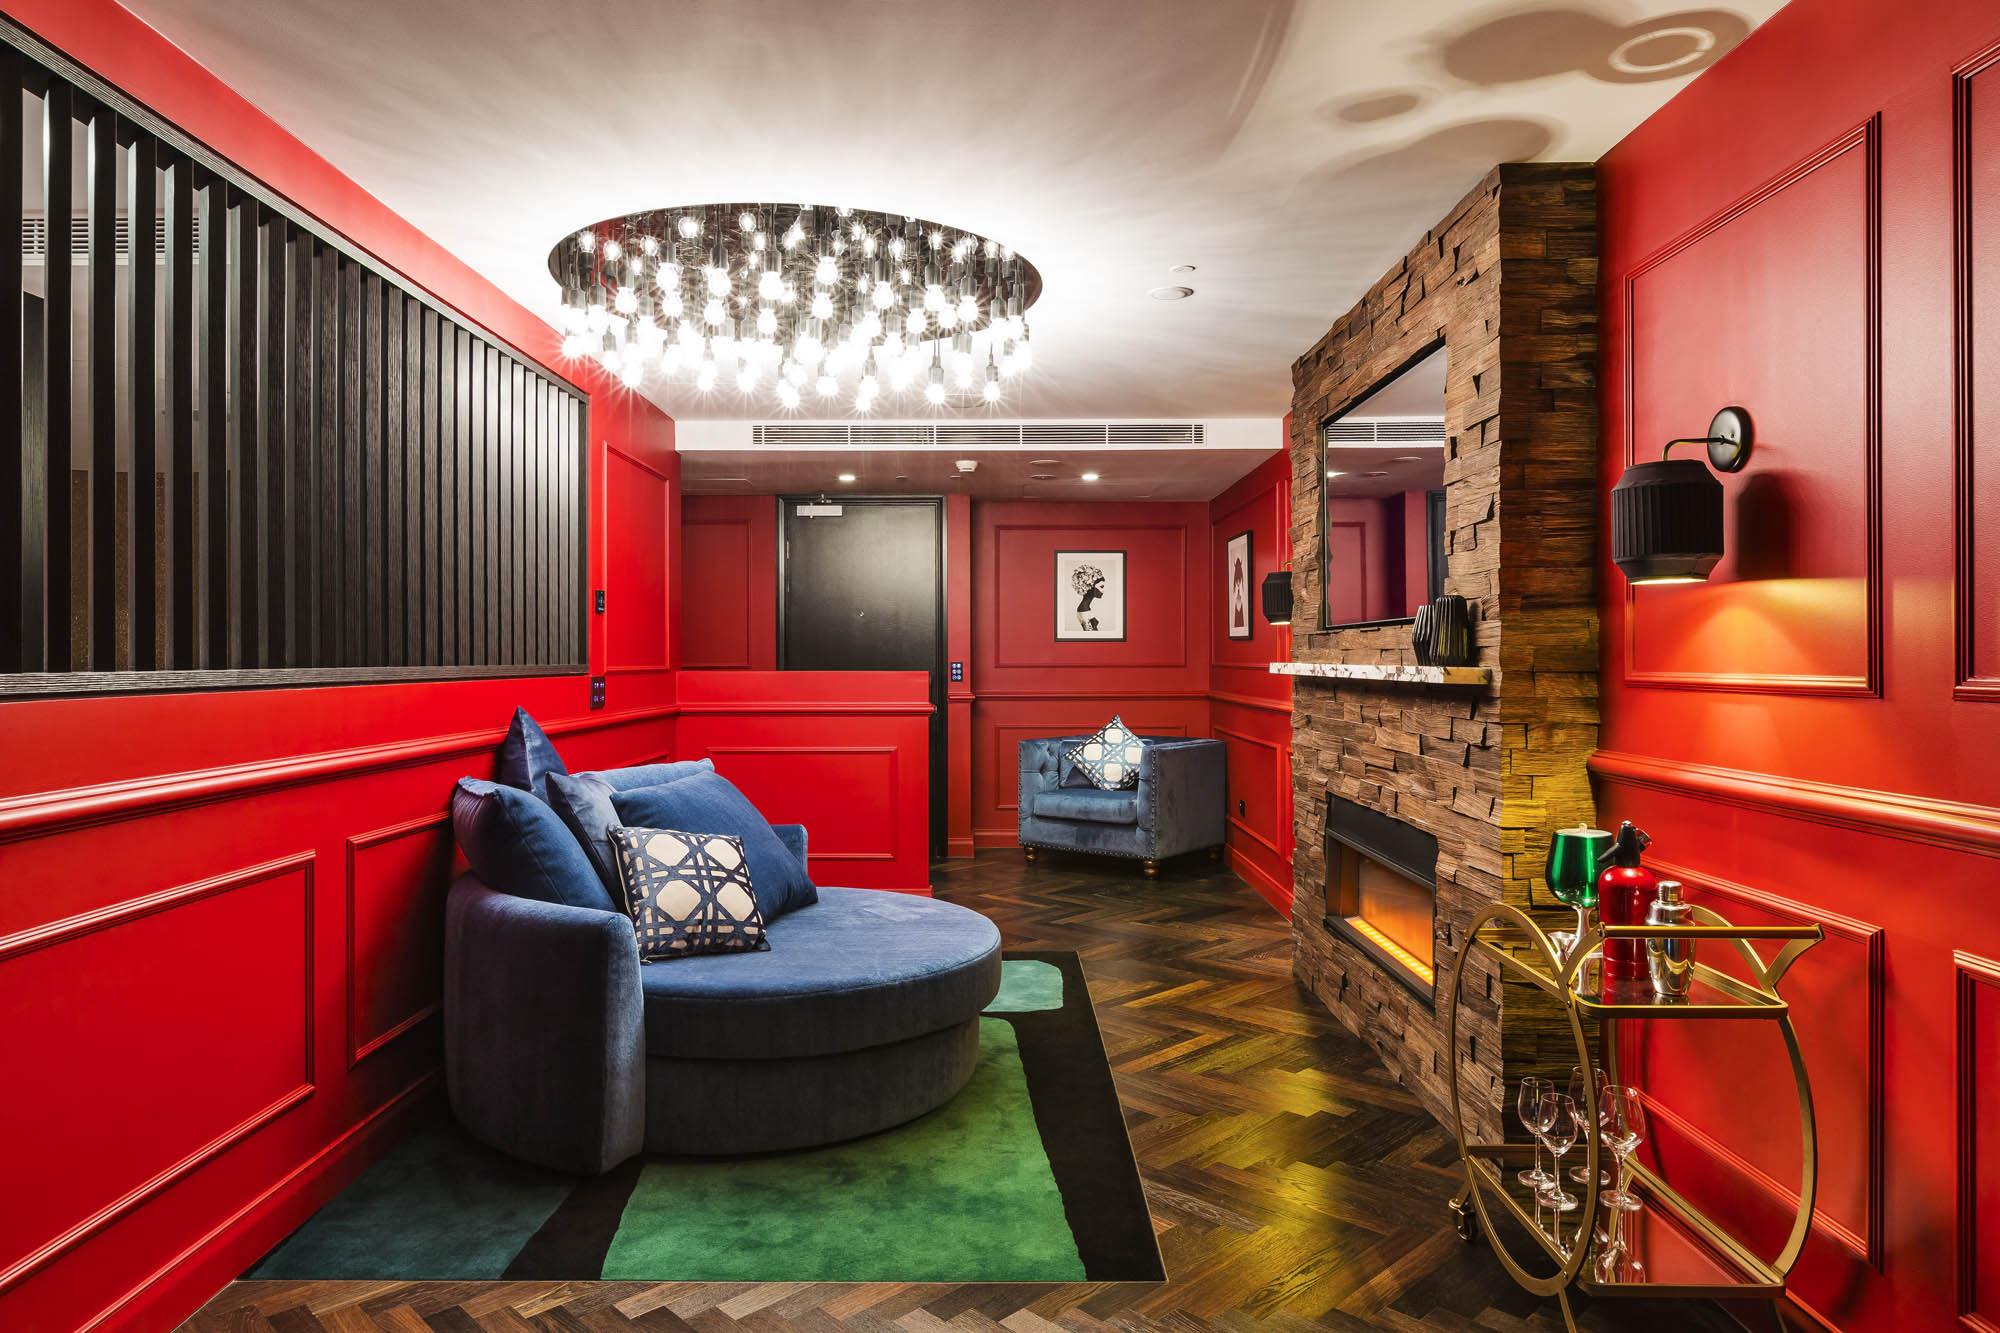 studios at the star sydney hotels design and construct nsw dark romance room red walls blue sofa chair fireplace lights drink trolley